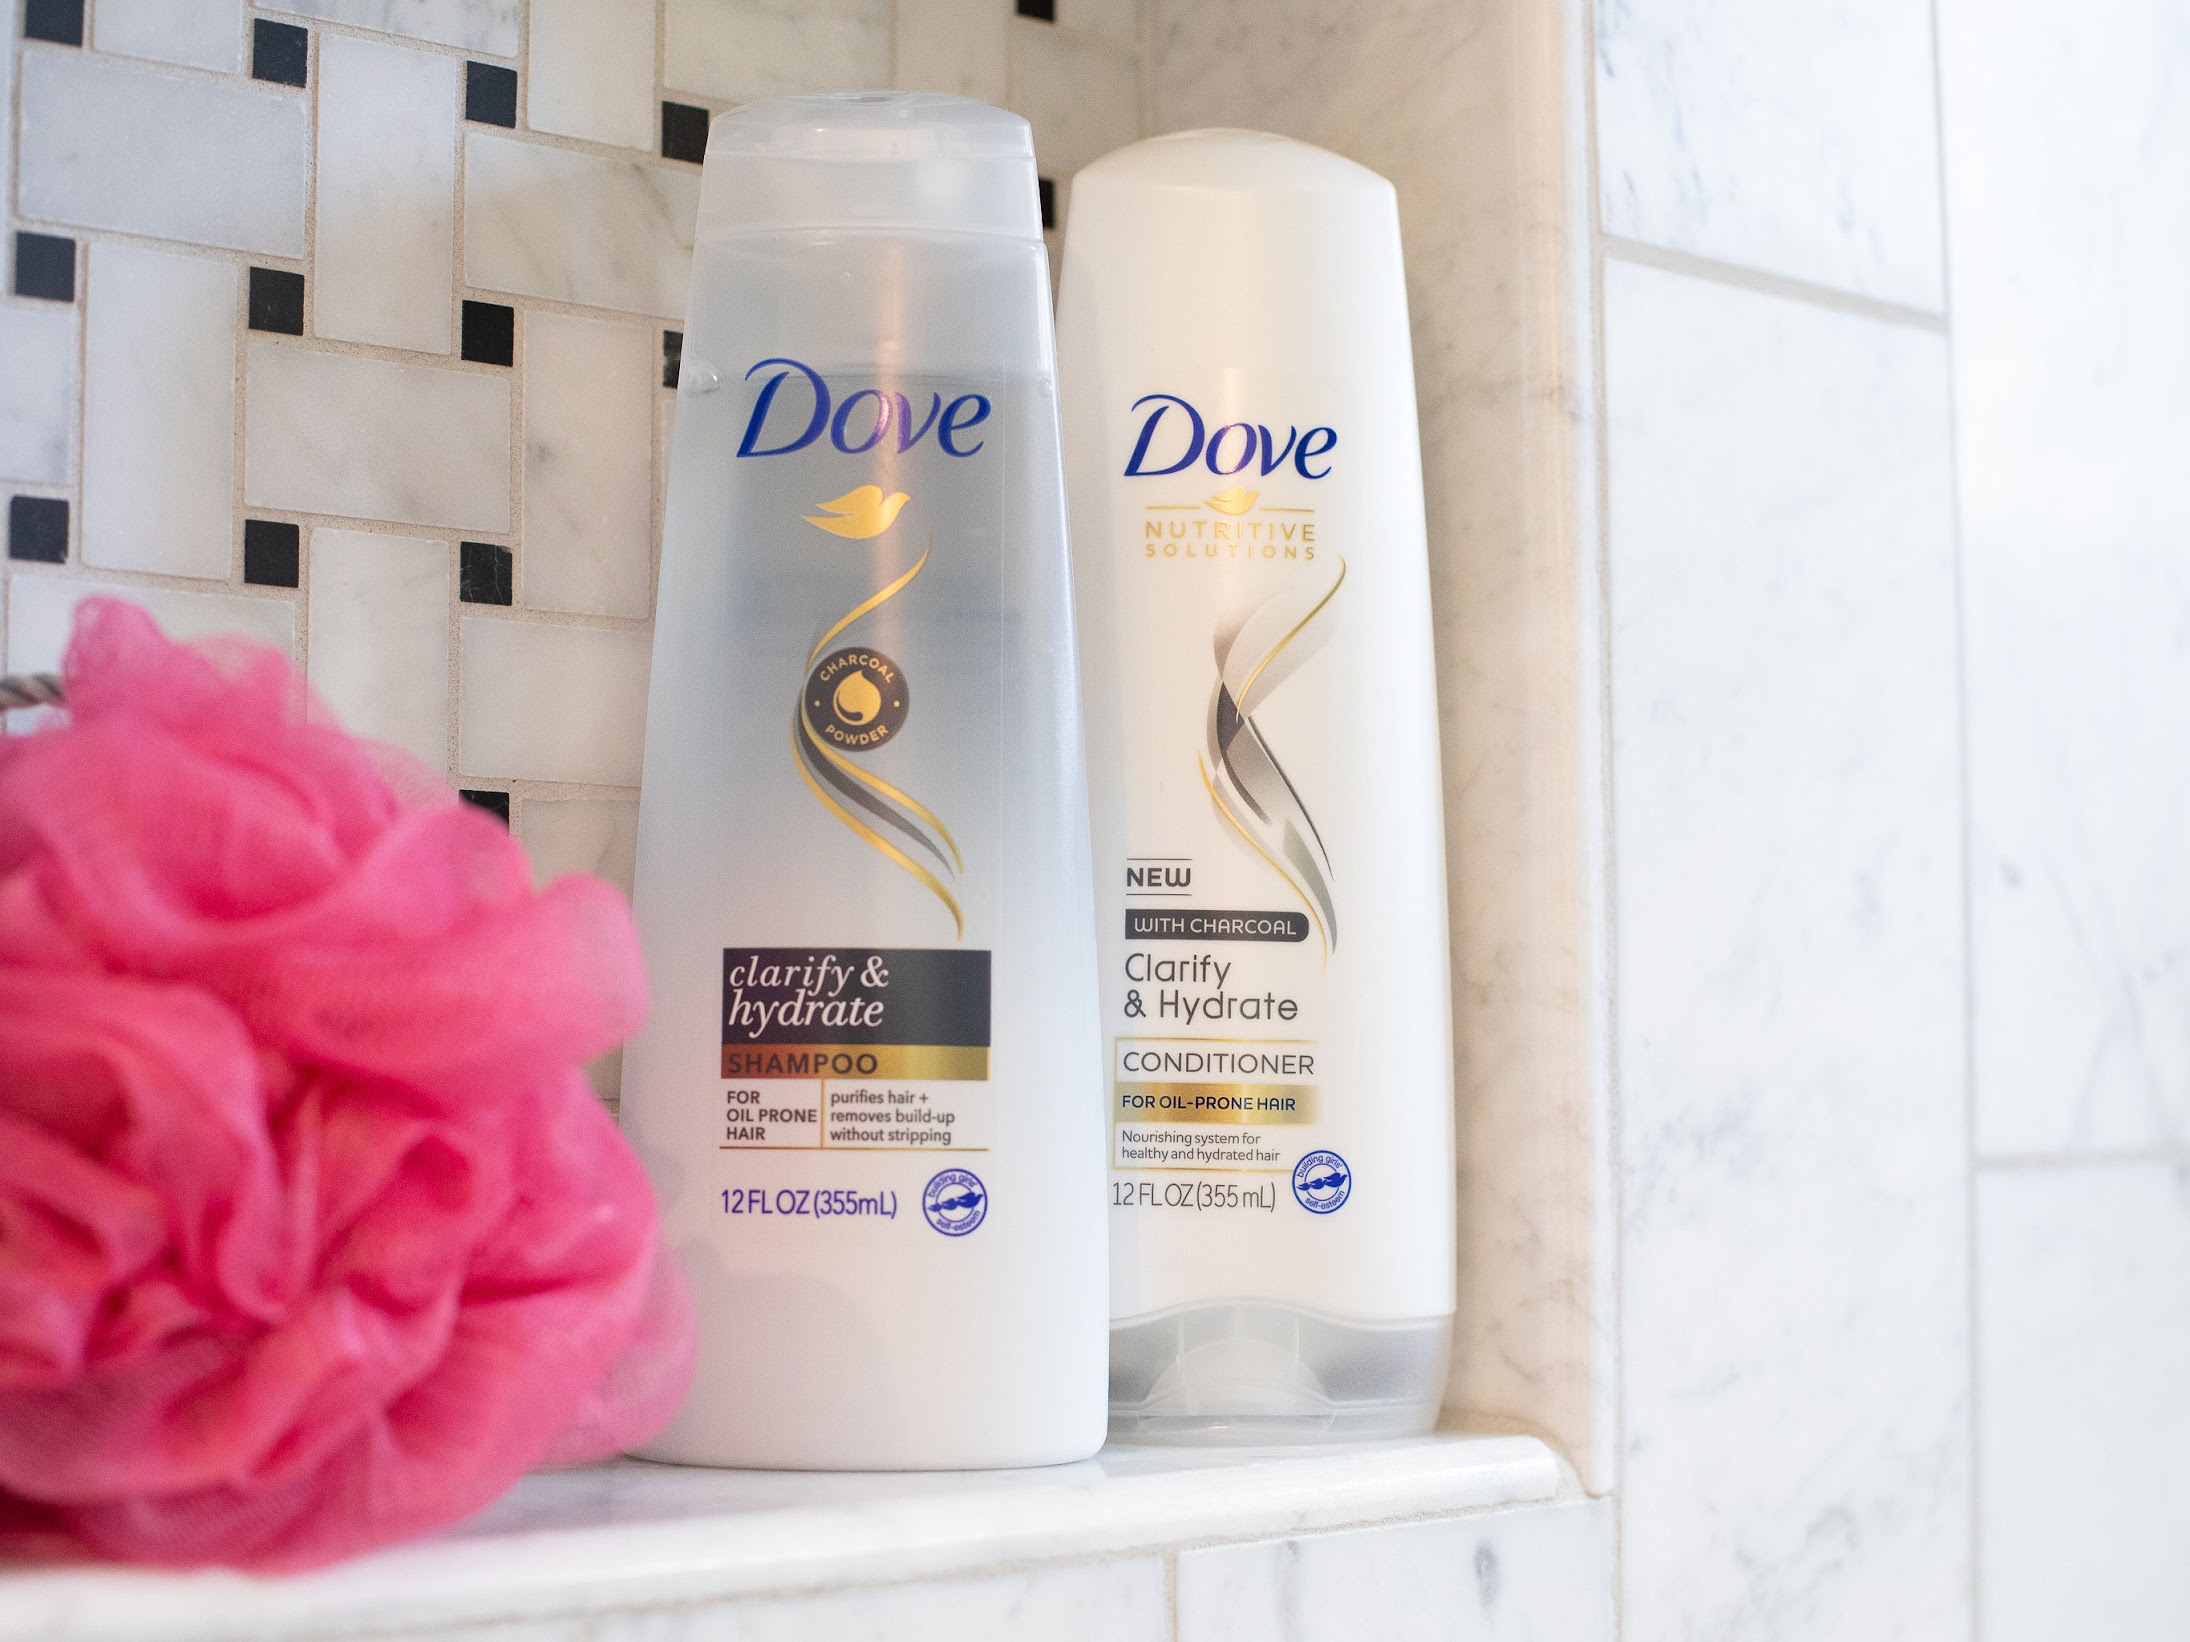 Fantastic Deals On Hair Care Favorites From Suave, Dove, Axe And More Available NOW At Publix on I Heart Publix 2